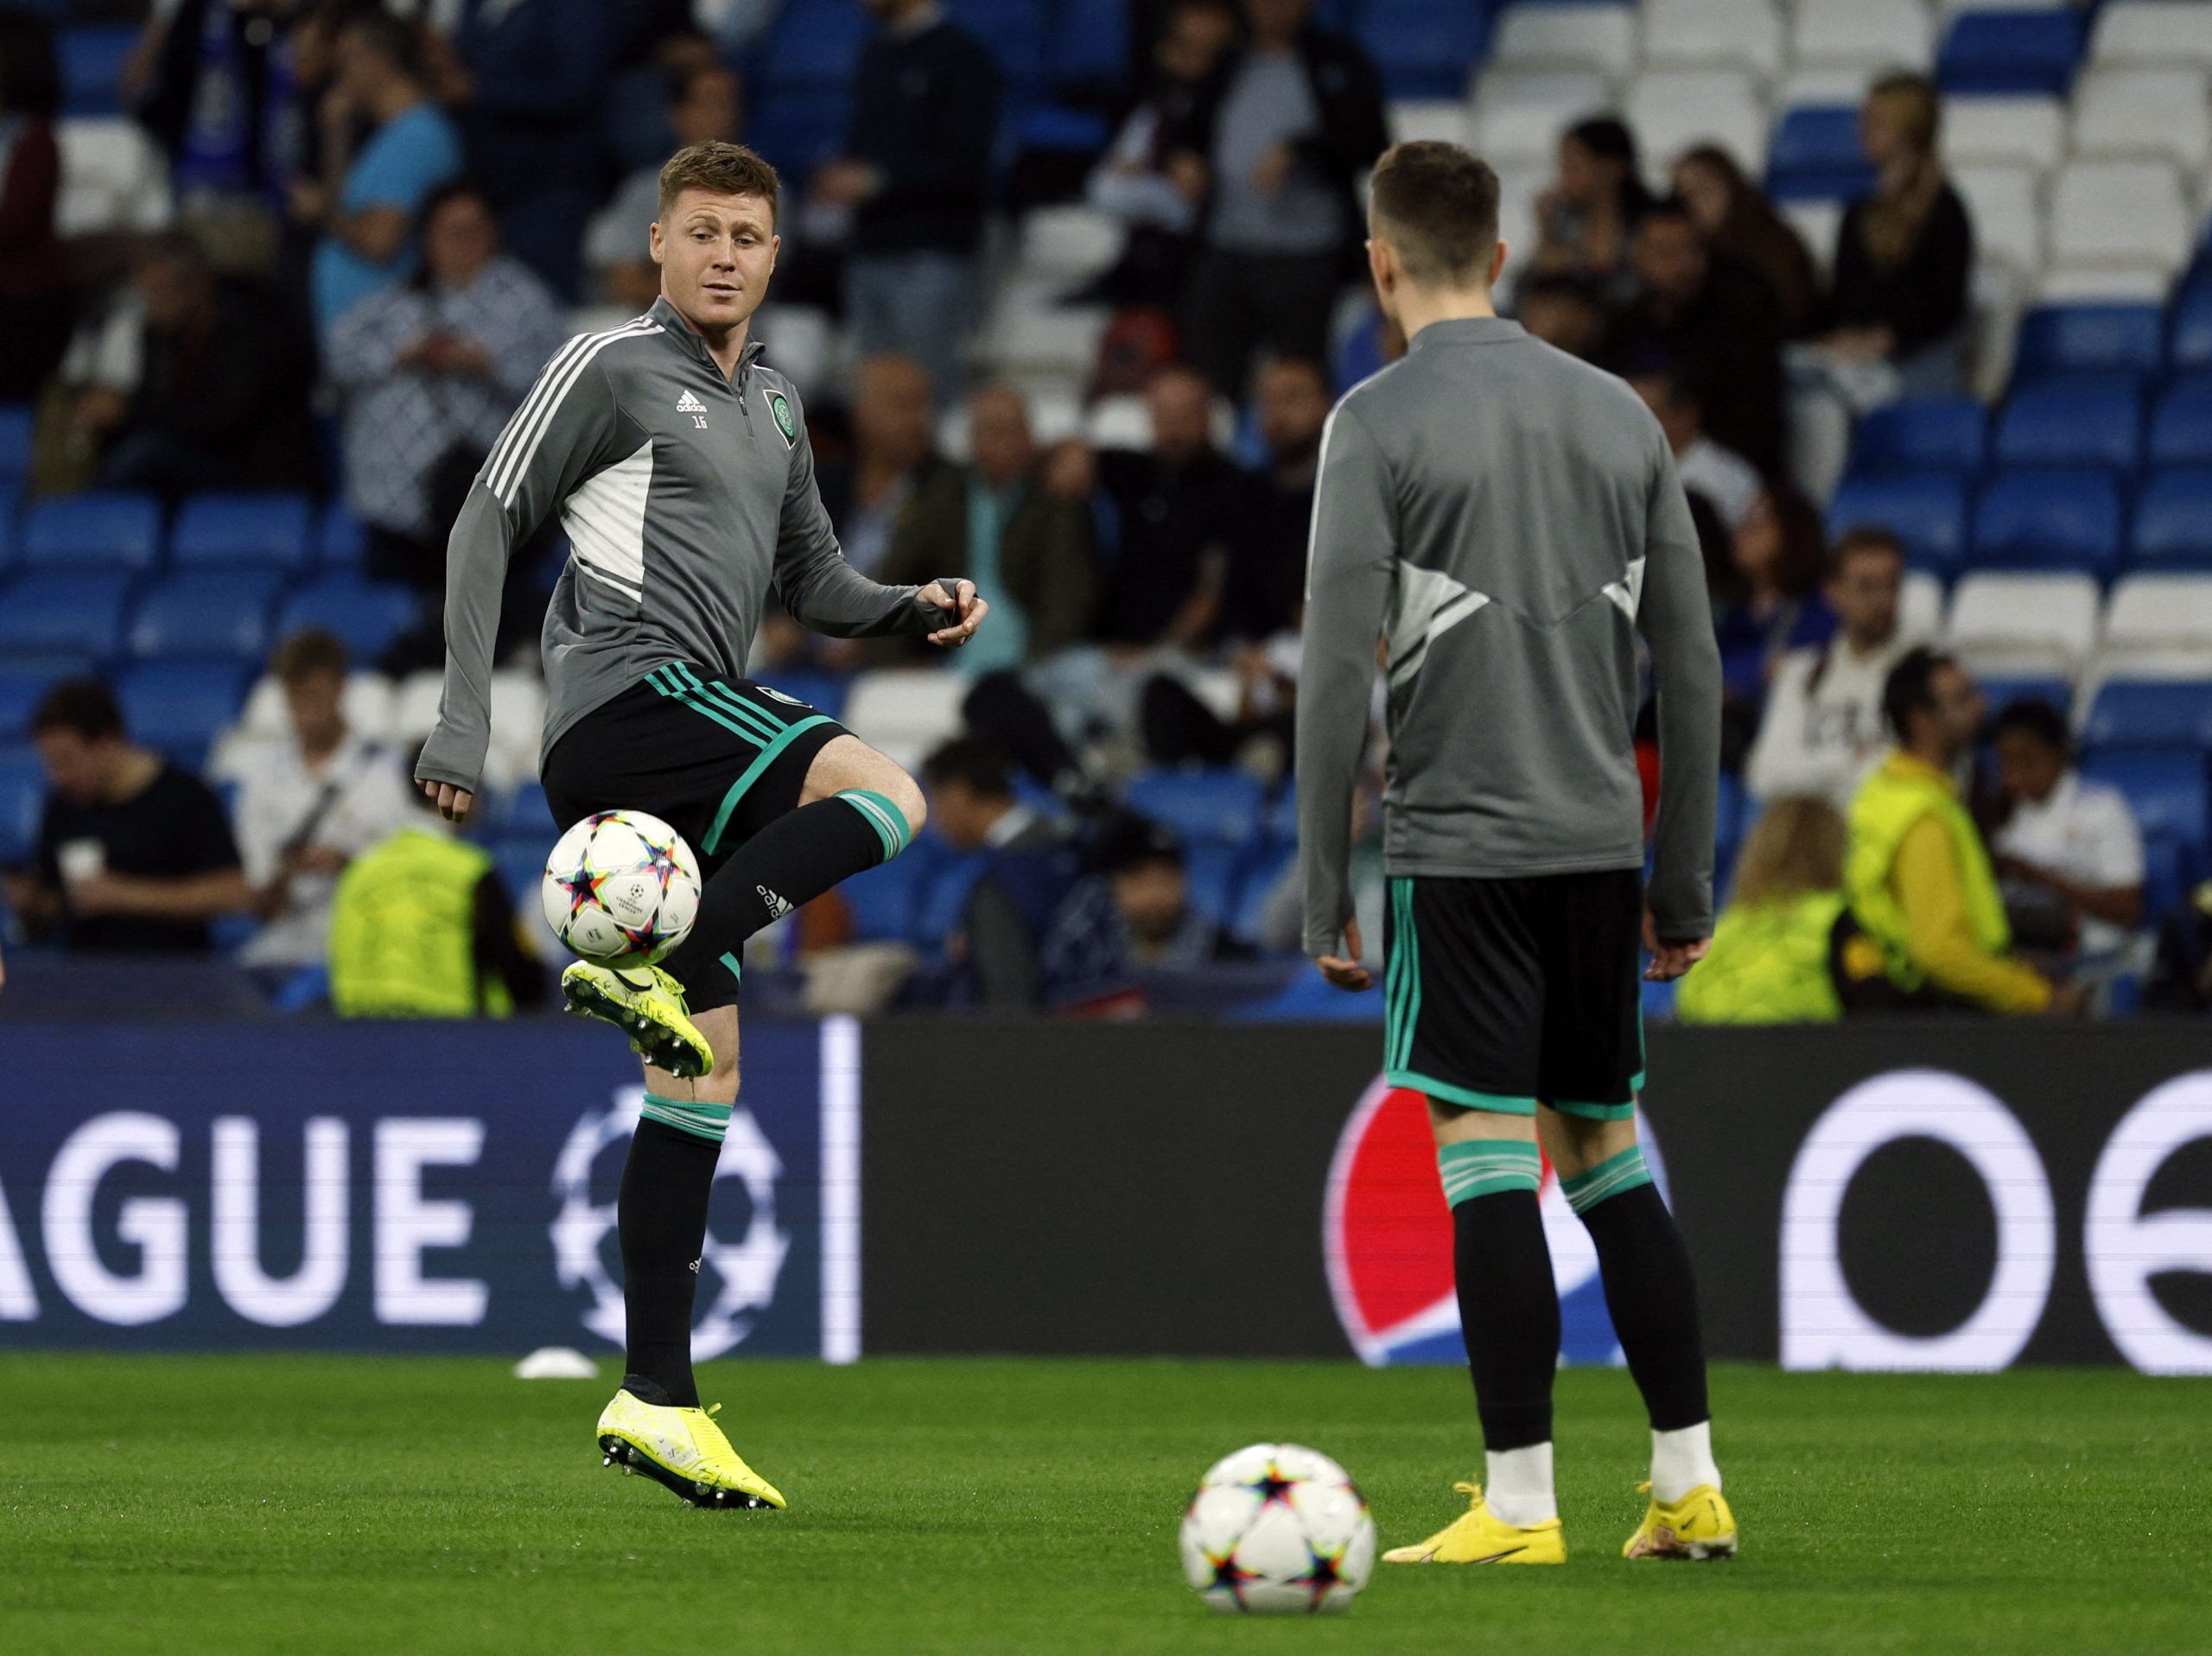 Soccer Football - Champions League - Group F - Real Madrid v Celtic - Santiago Bernabeu, Madrid, Spain - November 2, 2022 Celtic's James McCarthy during the warm up before the match REUTERS/Susana Vera